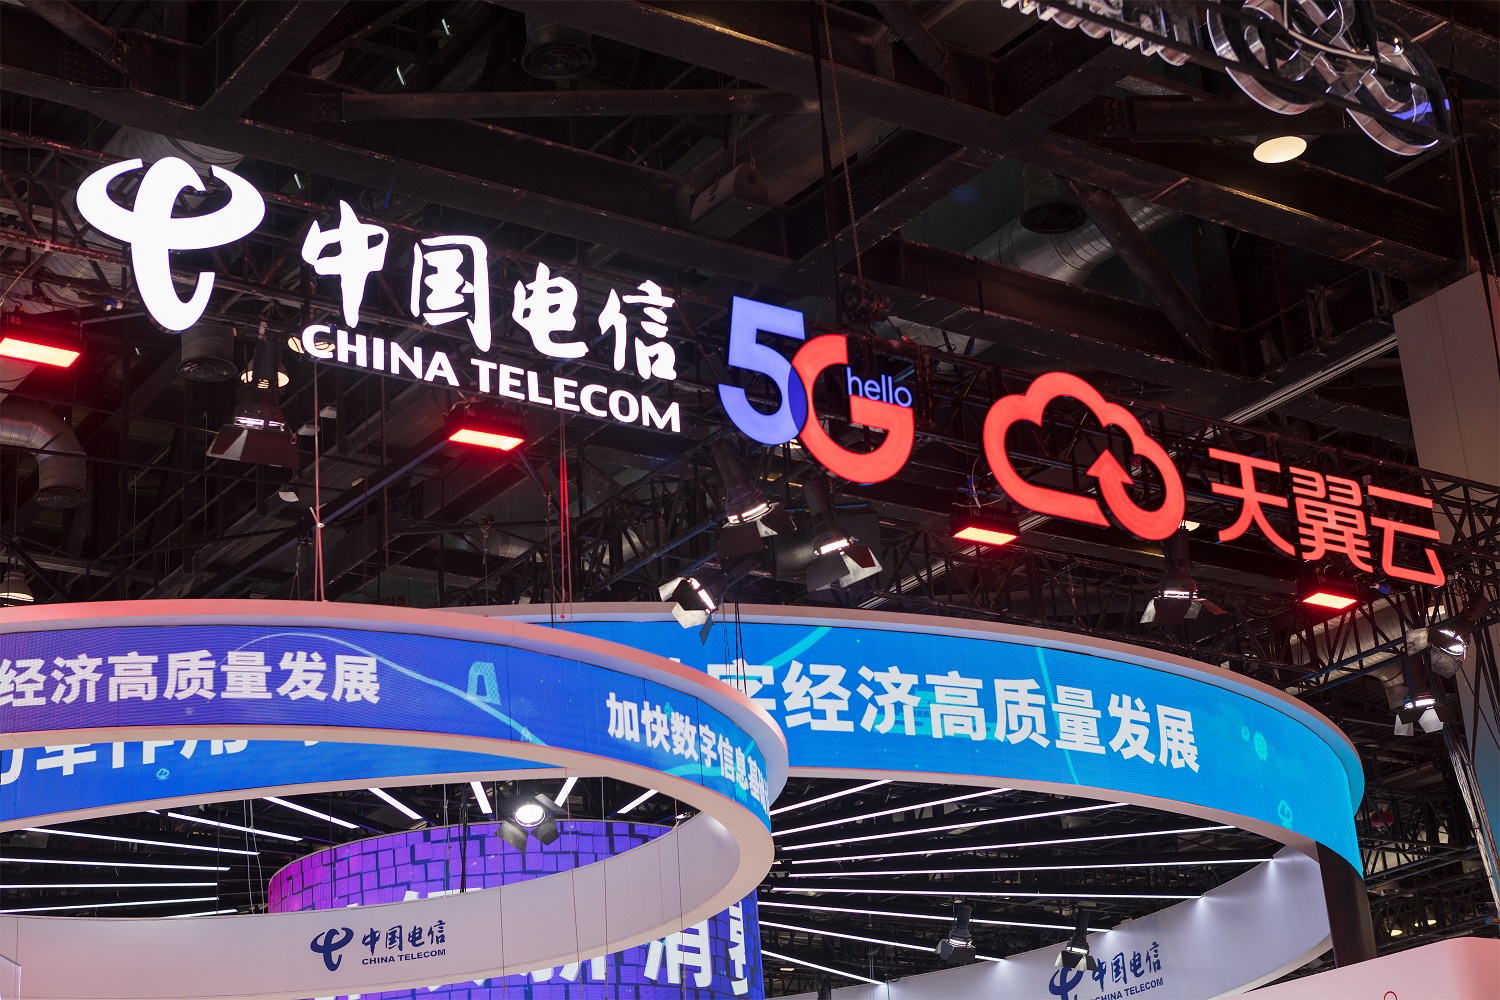 A China Telecom sign is lit up at the China National Convention Center, in Beijing, China.